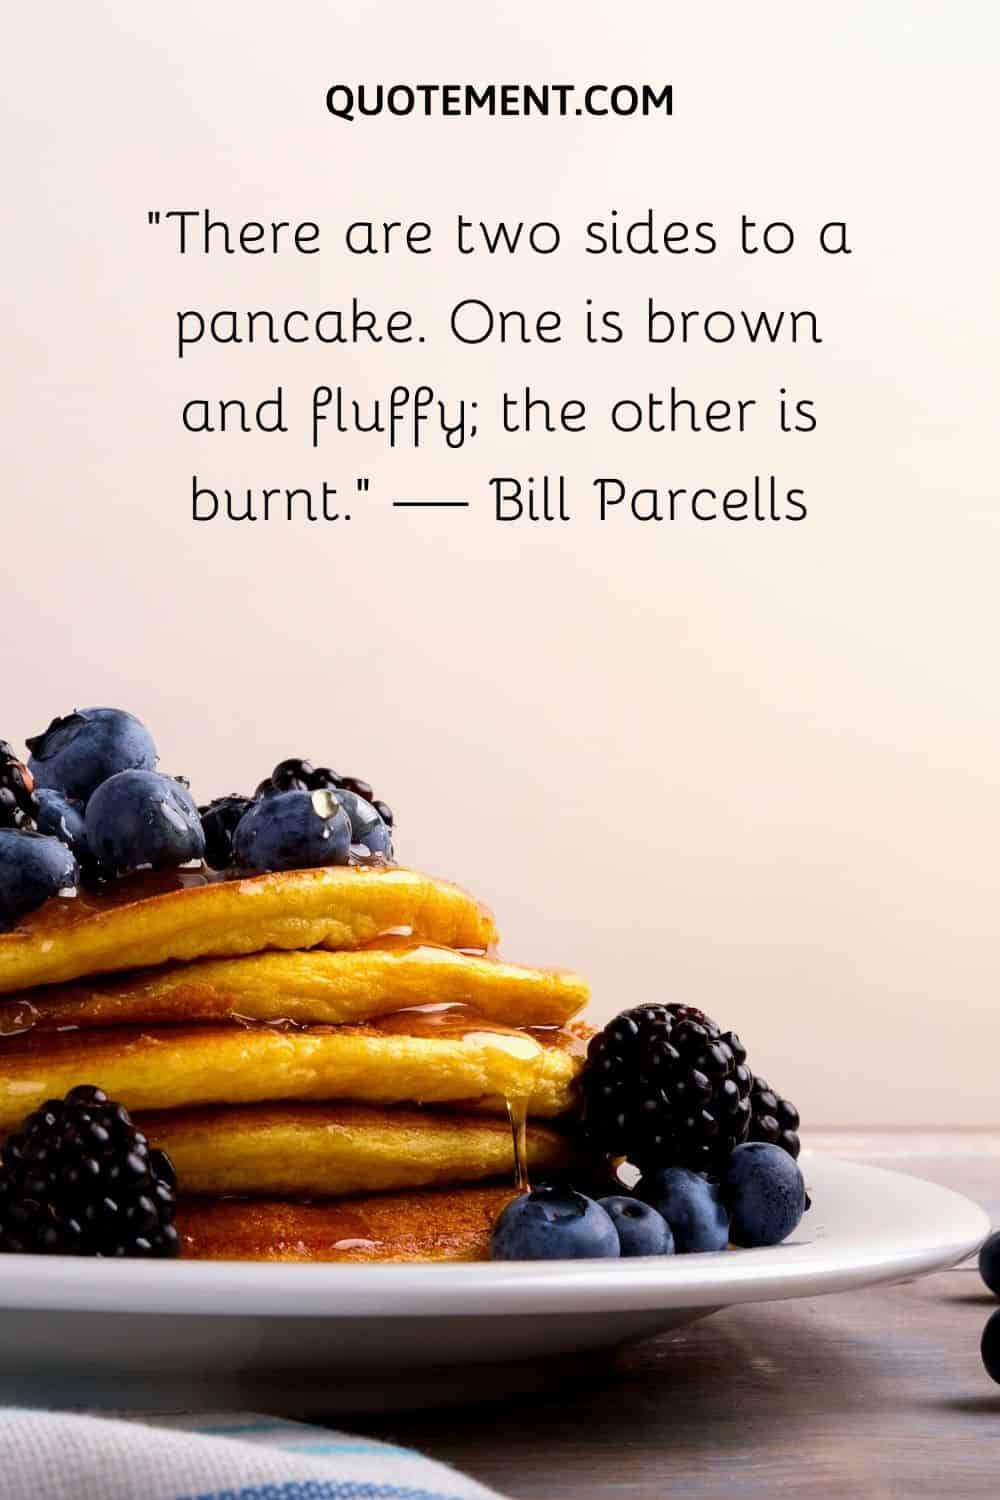 There are two sides to a pancake